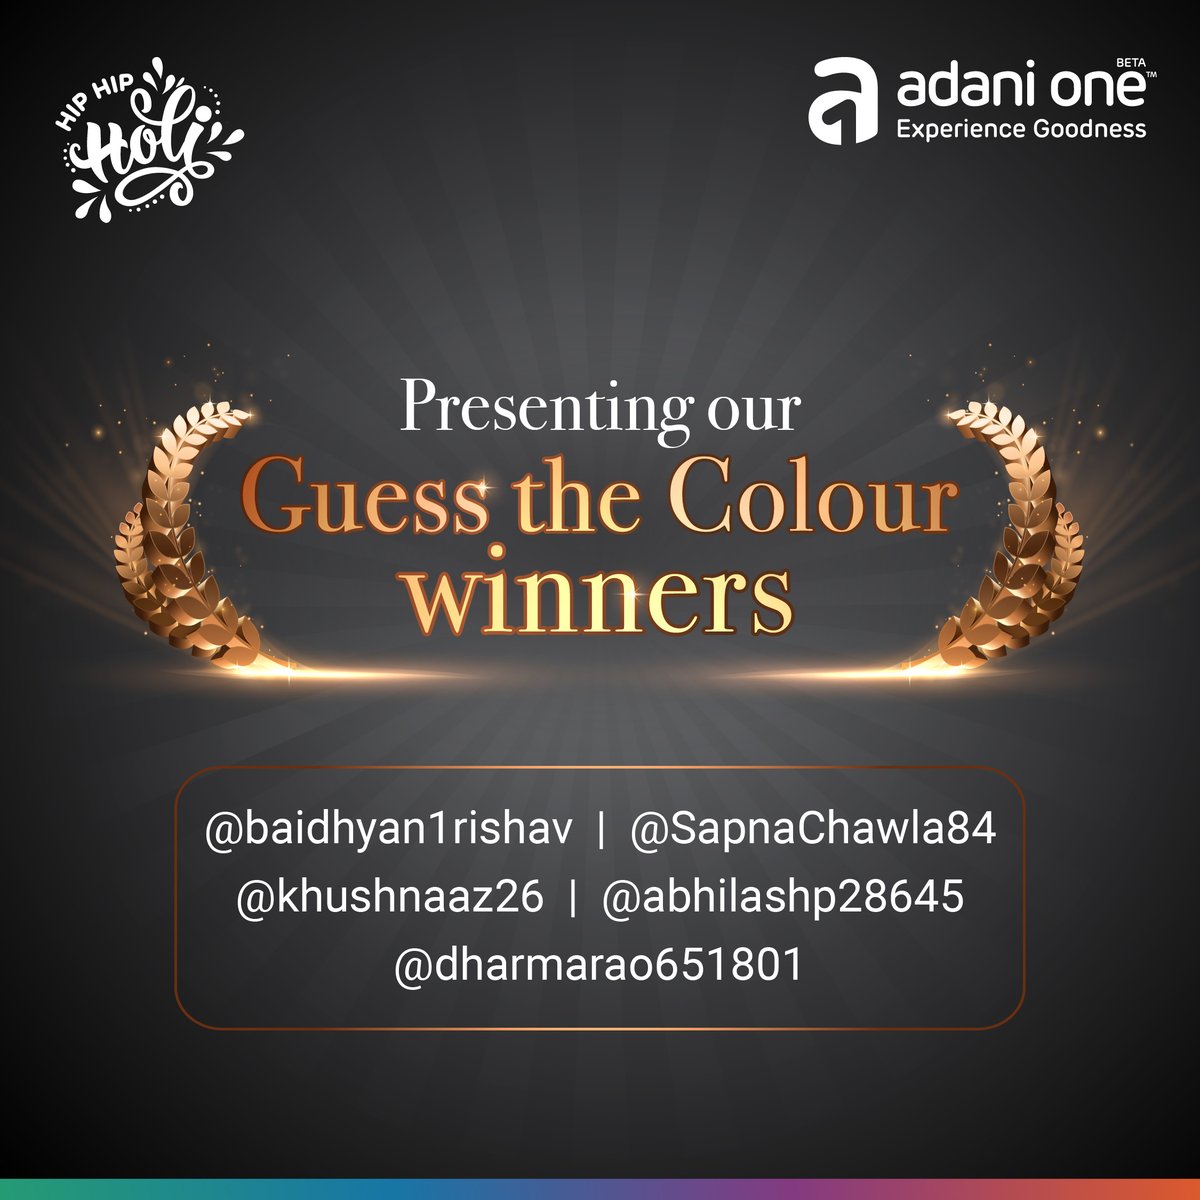 And the winners of our #GuessTheColour contest are here✨ Super congratulations to all the winners! Kindly DM us your contact details to claim your gift hampers. For more such fun contests, keep following Adani One. 

#Winners #HoliContest #Fun #AdaniOne #ExperienceGoodness